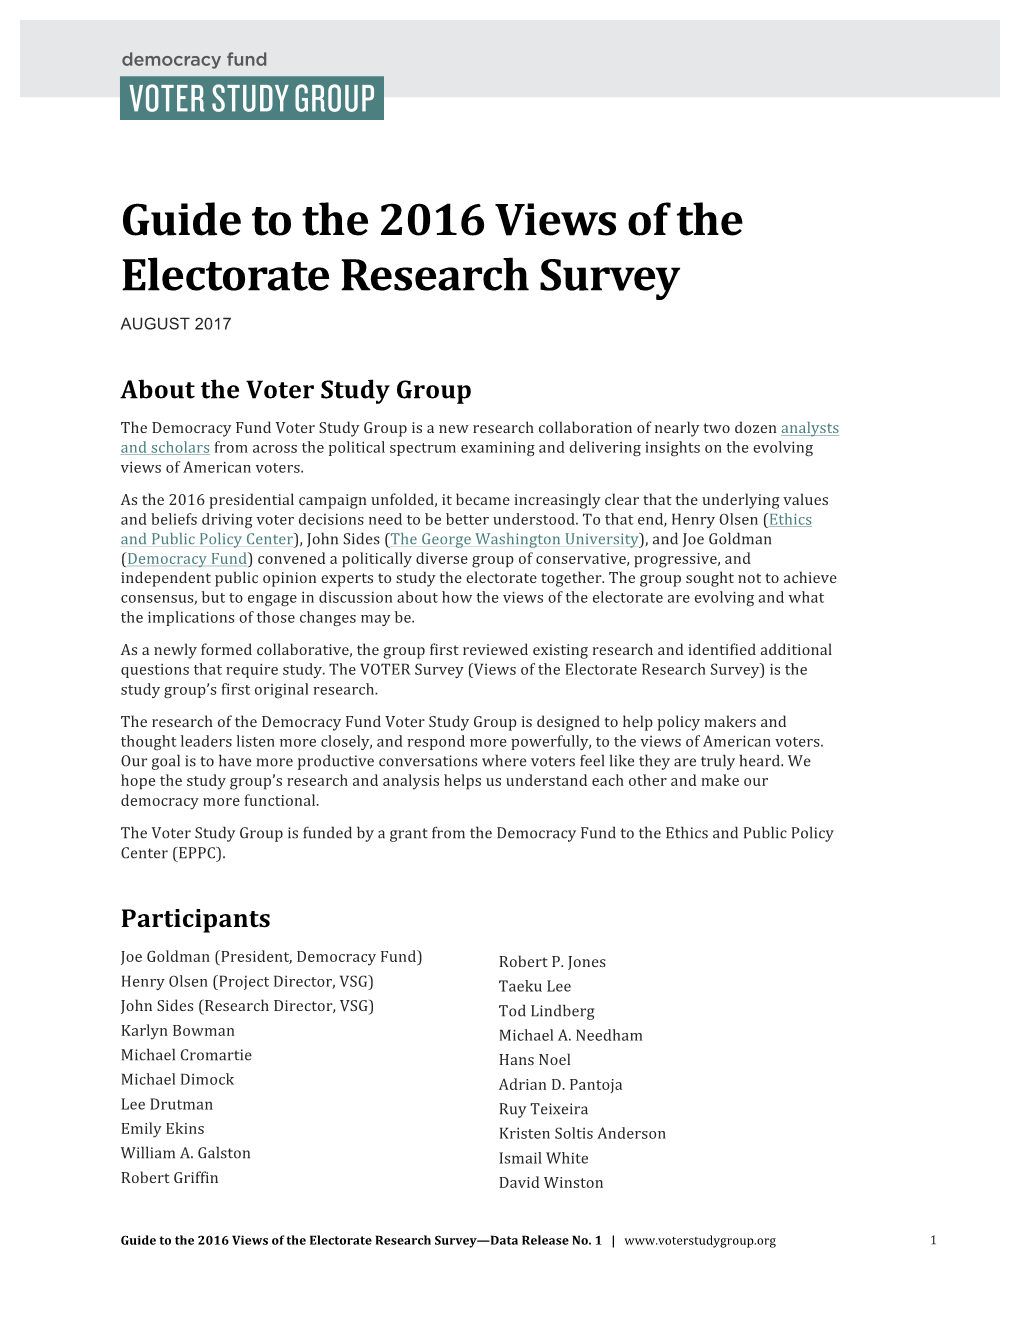 Guide to the 2016 Views of the Electorate Research Survey AUGUST 2017